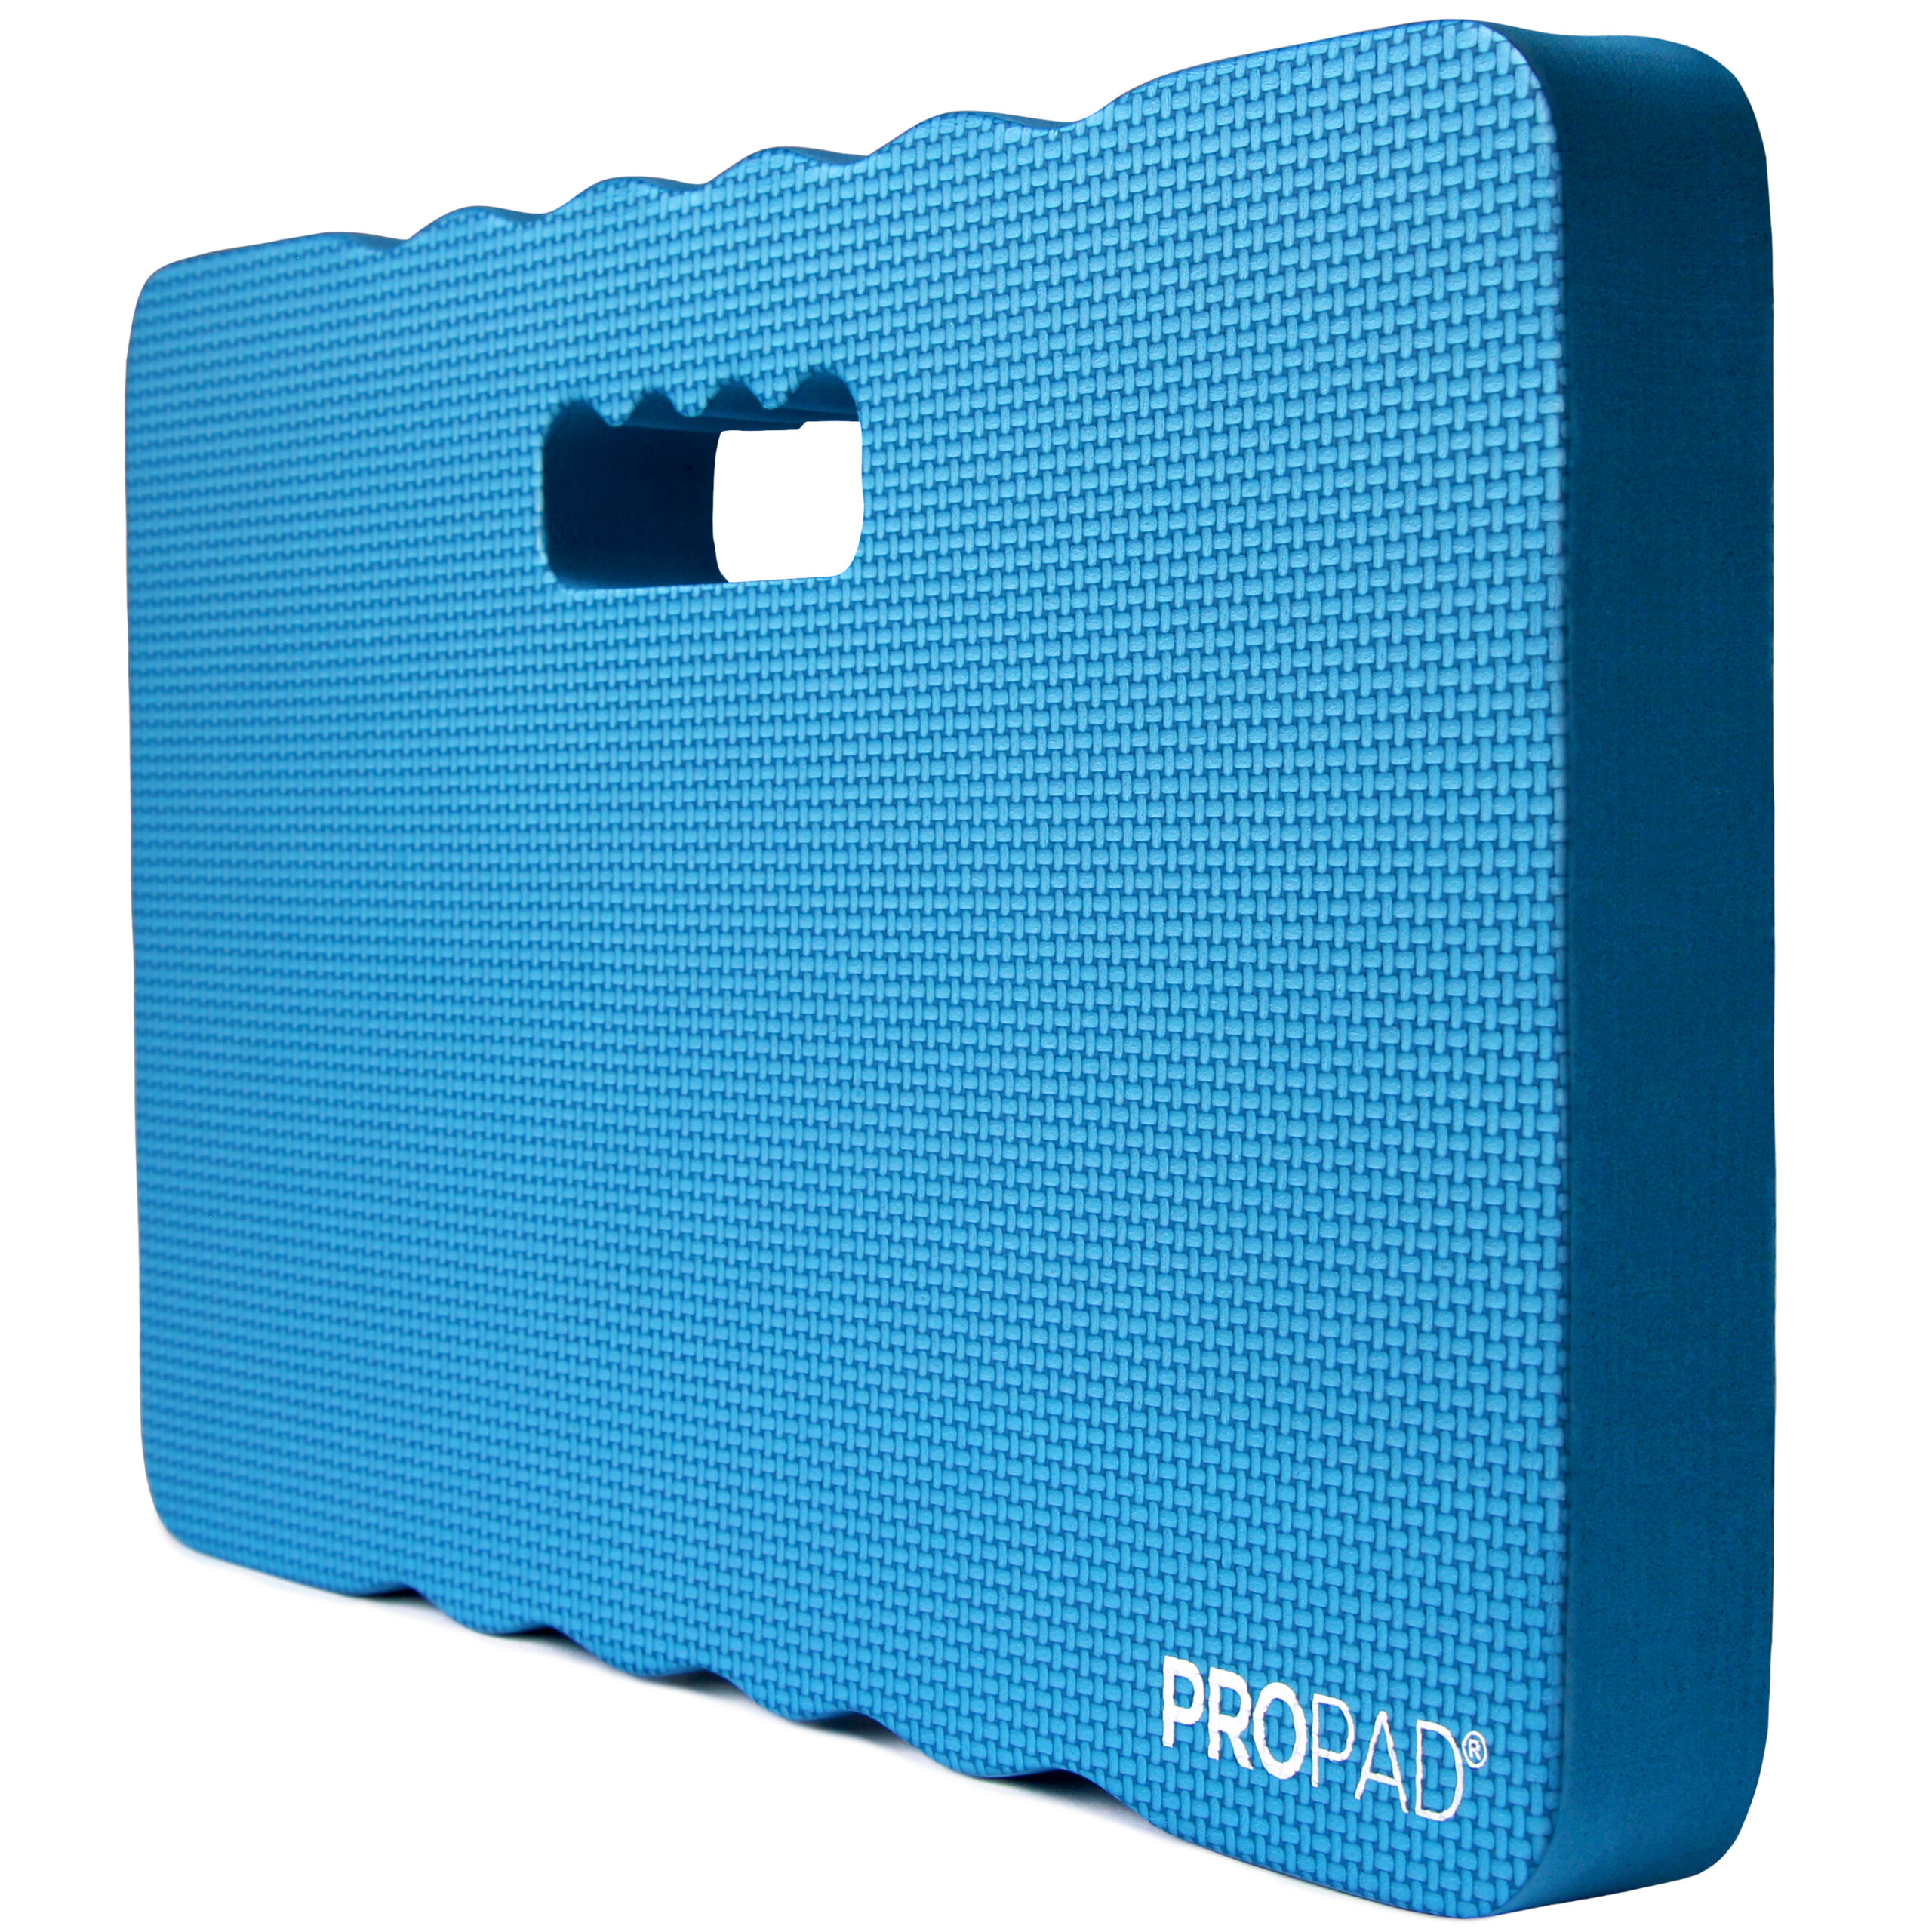 PROPAD ® Premium Extra Thick Kneeling Pad, 1.5 Inch Thick